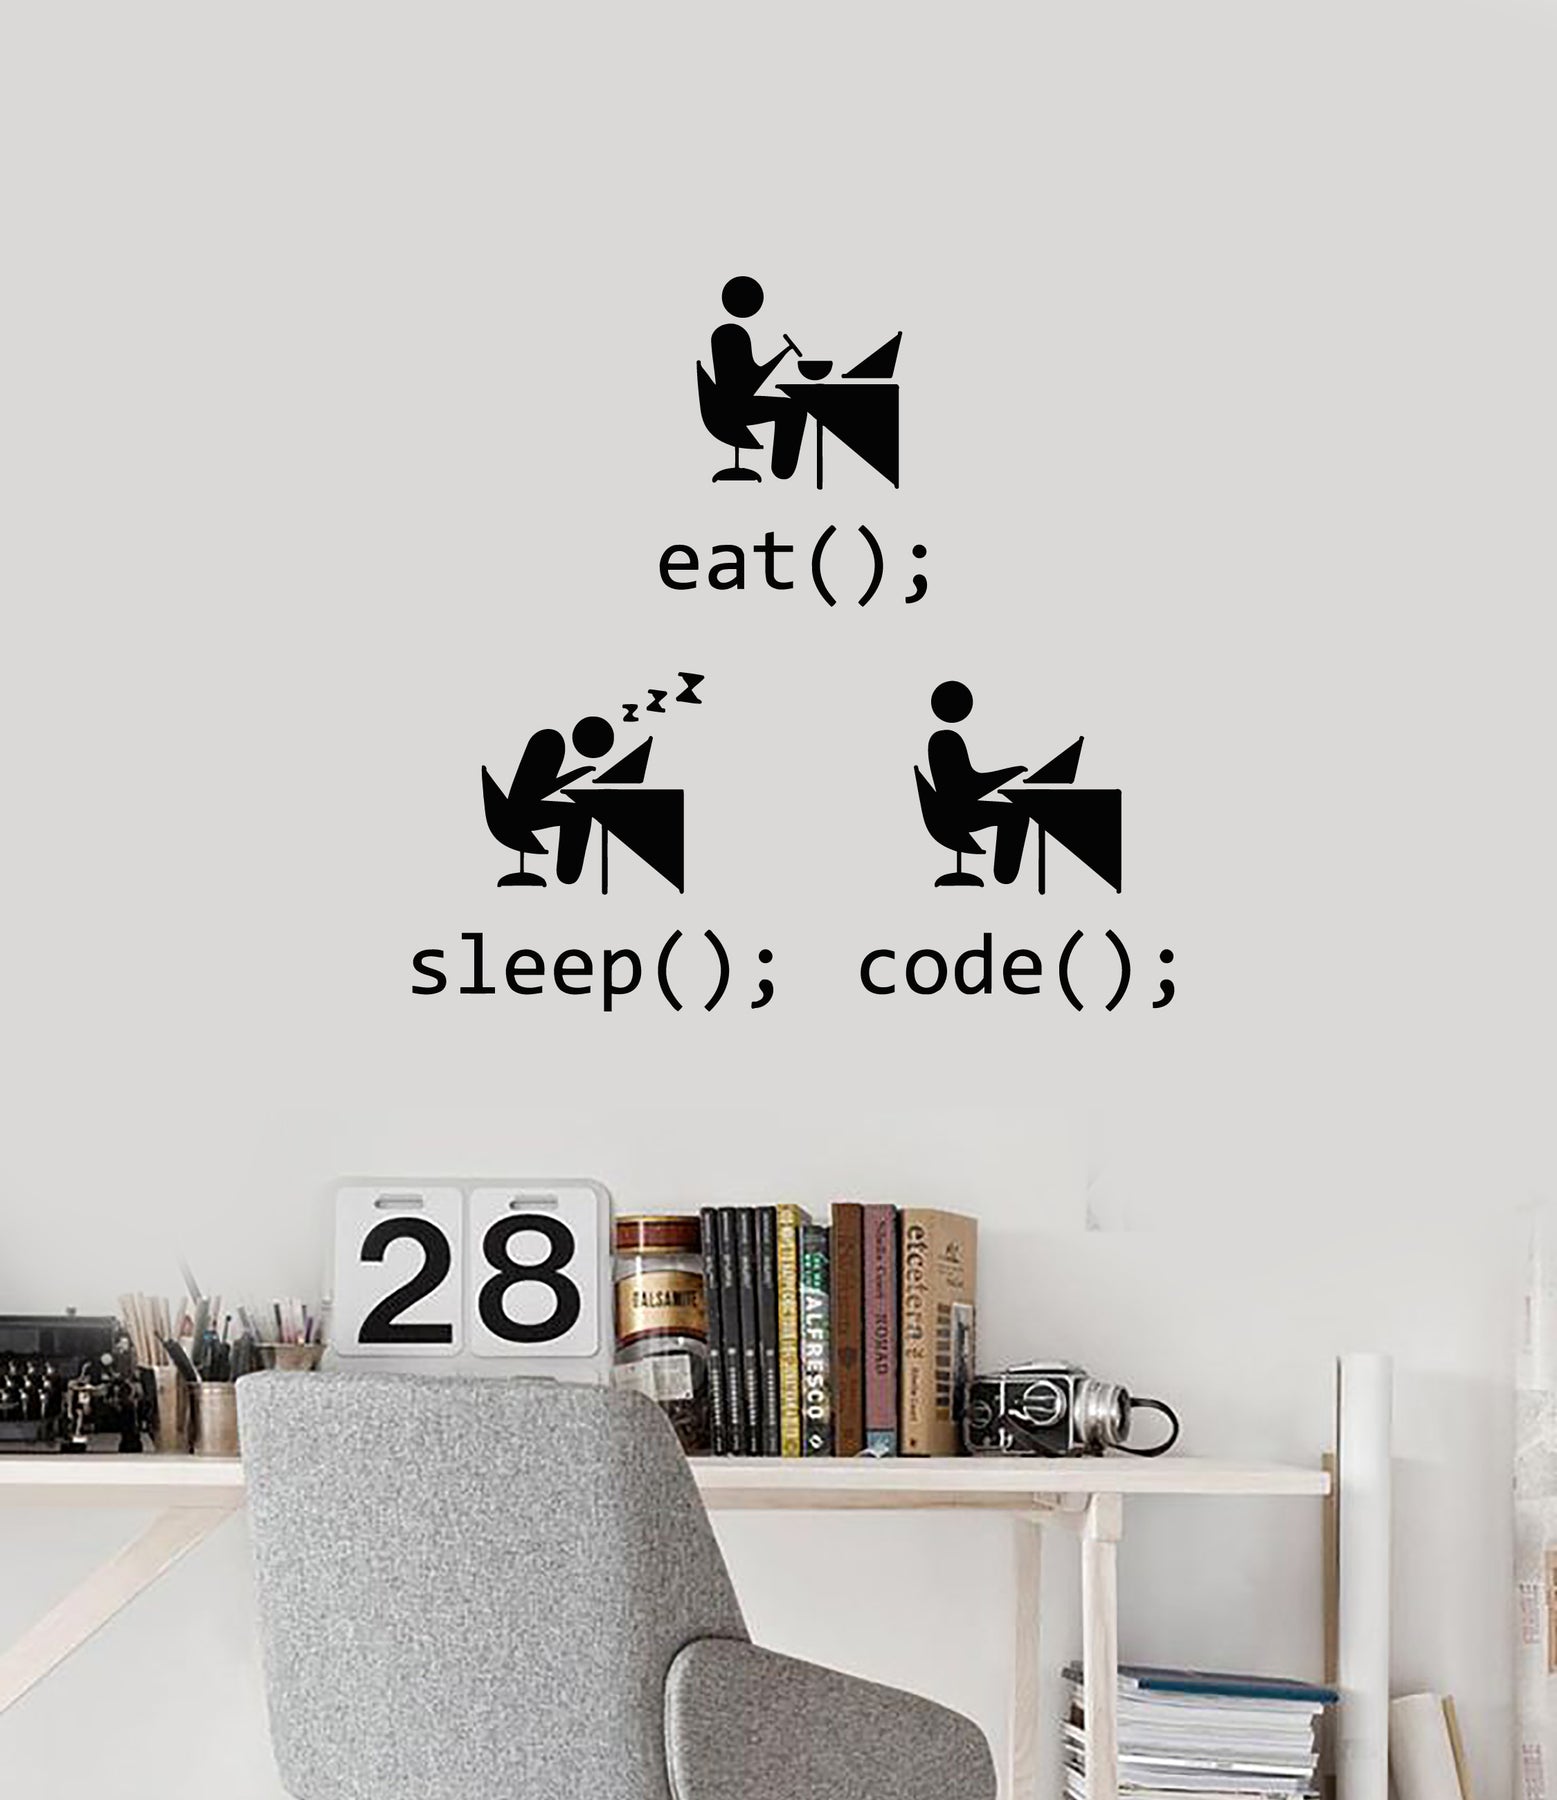 Vinyl Wall Decal Eat Sleep Code Table Work Repeat Office Decor Sticker Wallstickers4you